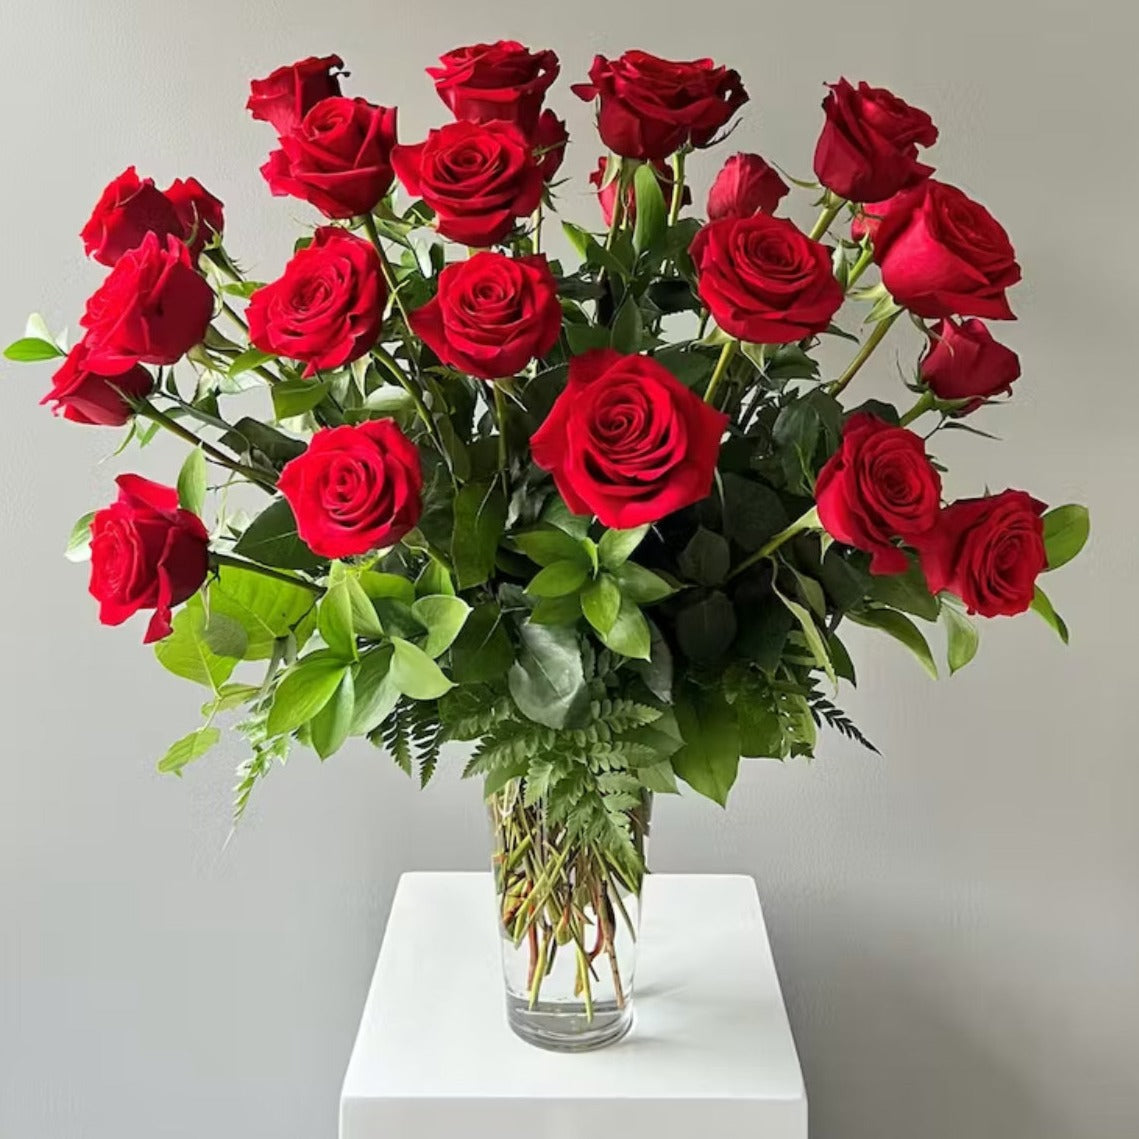 Romantic Red Roses in a Vase - The Bloom Room 